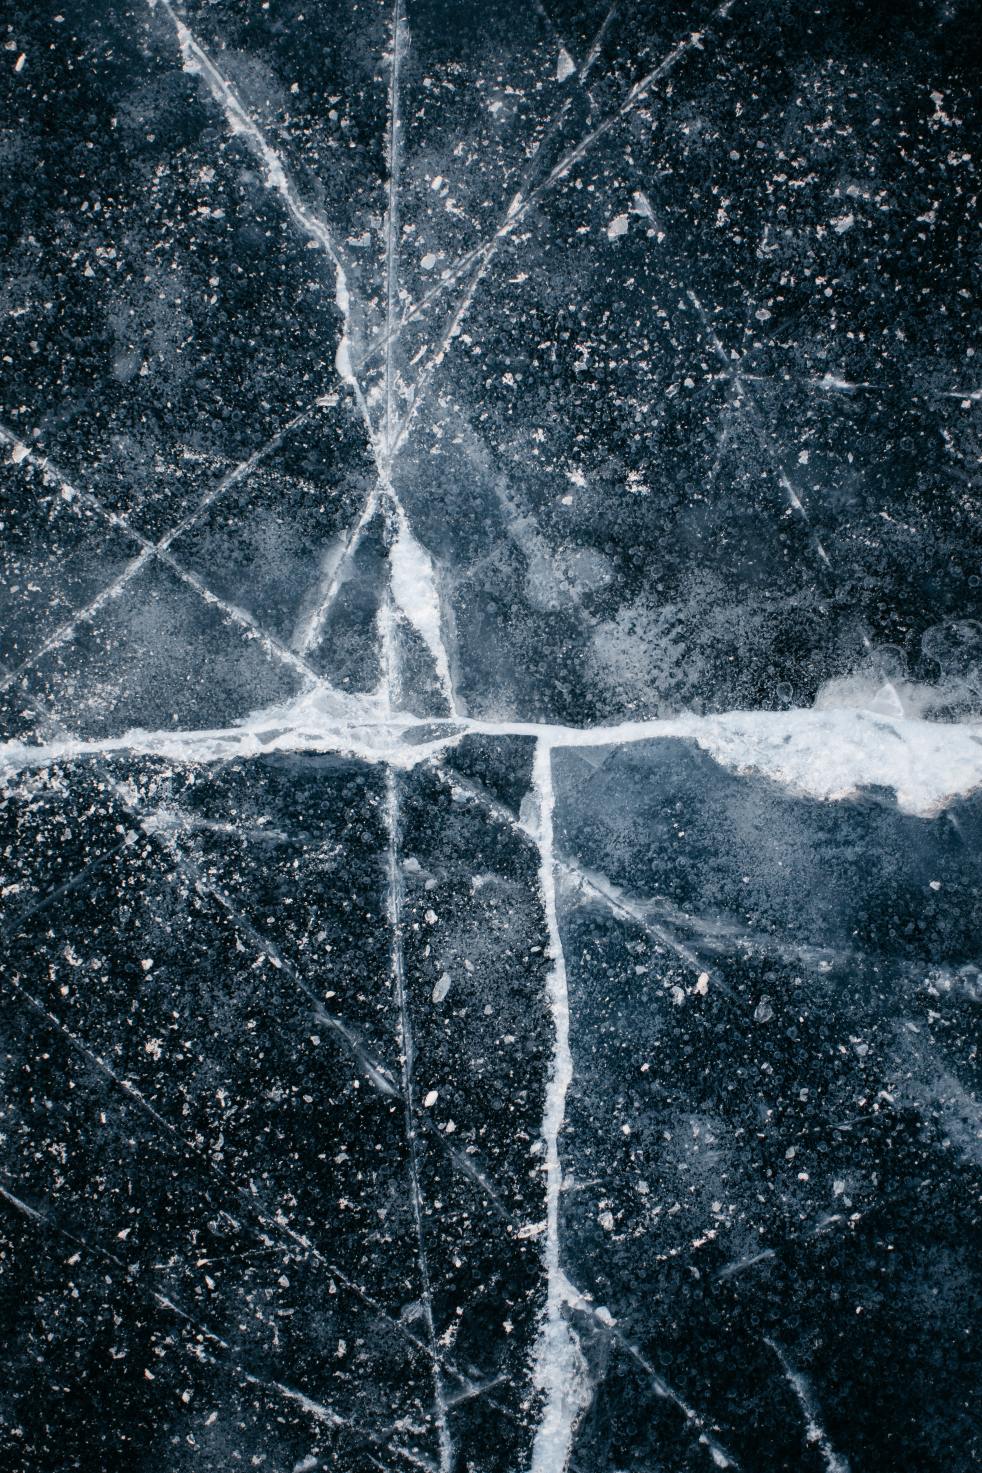 Cracked ice on a frozen lake.